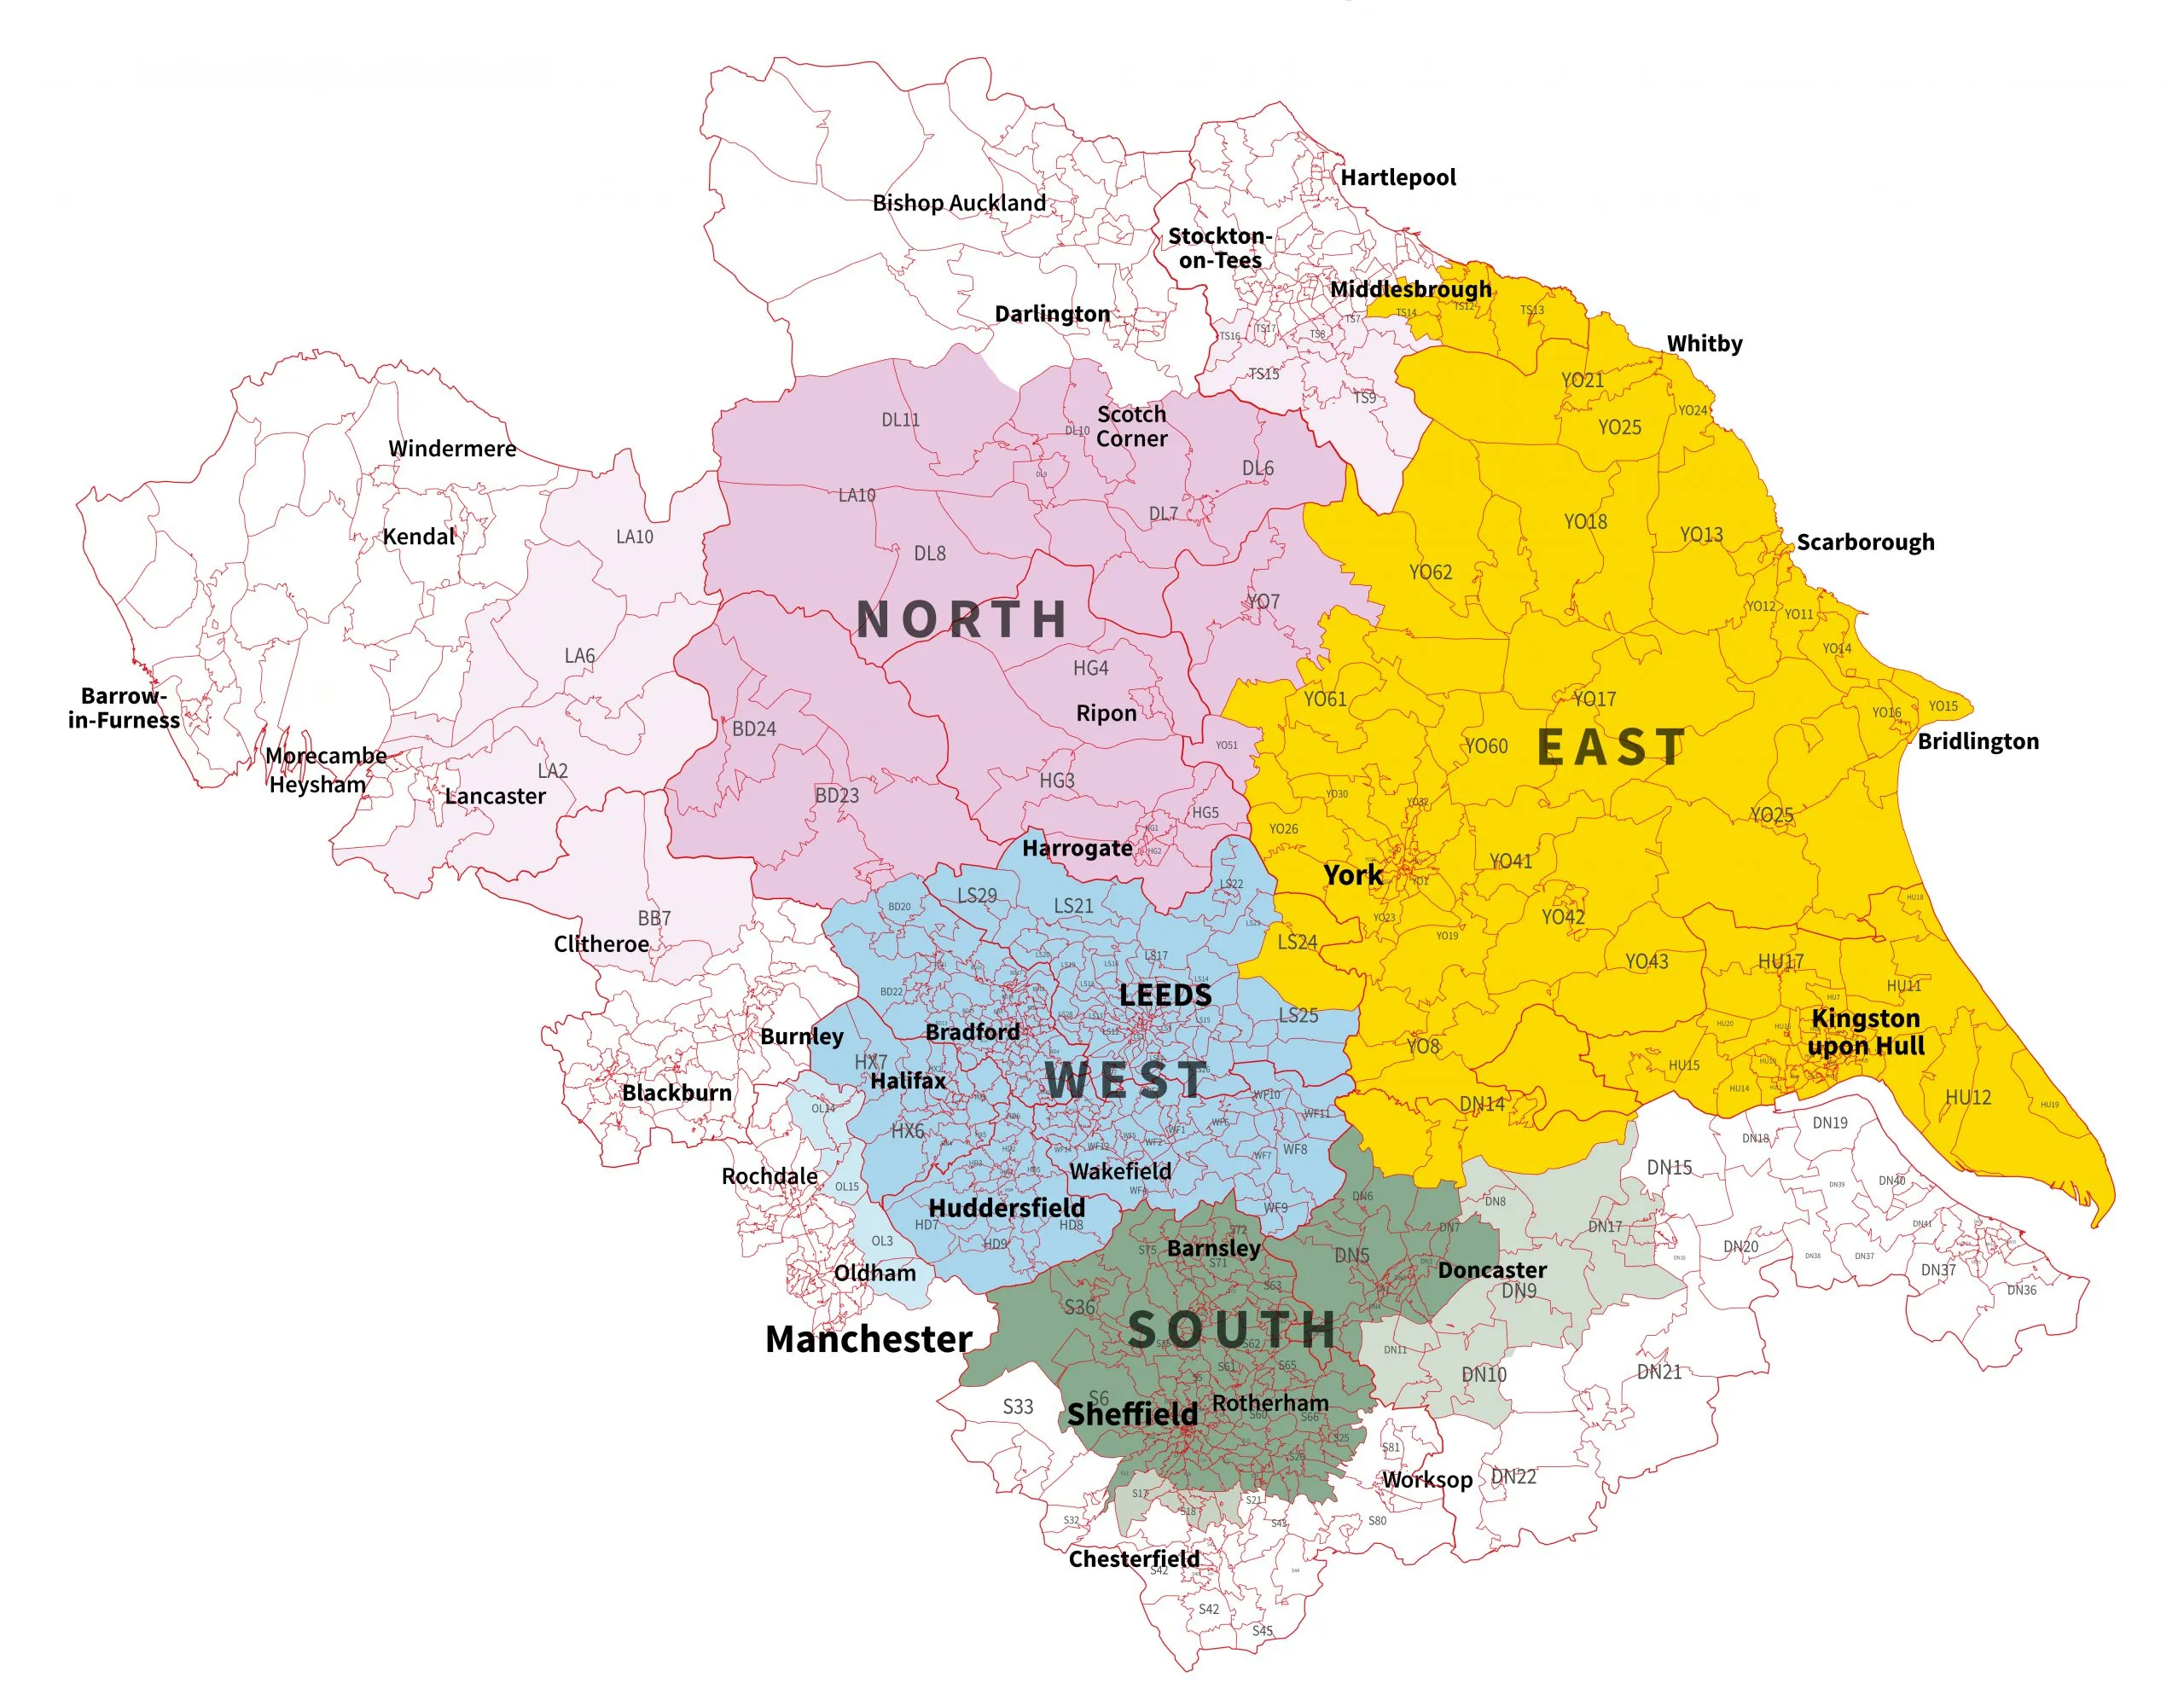 A map showing the Yorkshire Air Ambulance fundraising regions